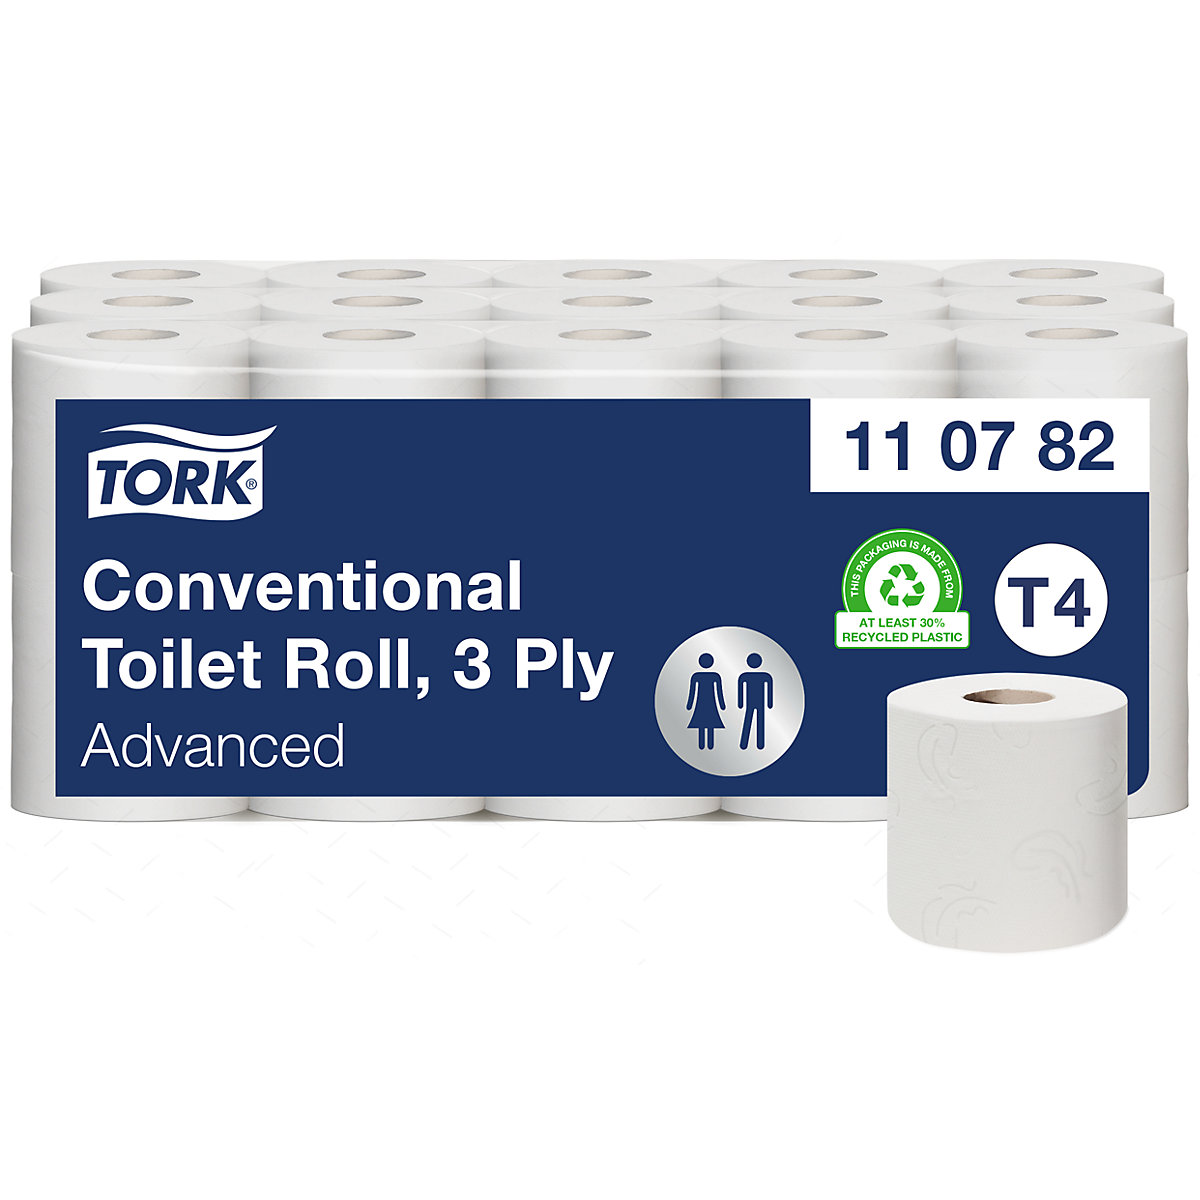 Small rolls of toilet paper, household roll – TORK